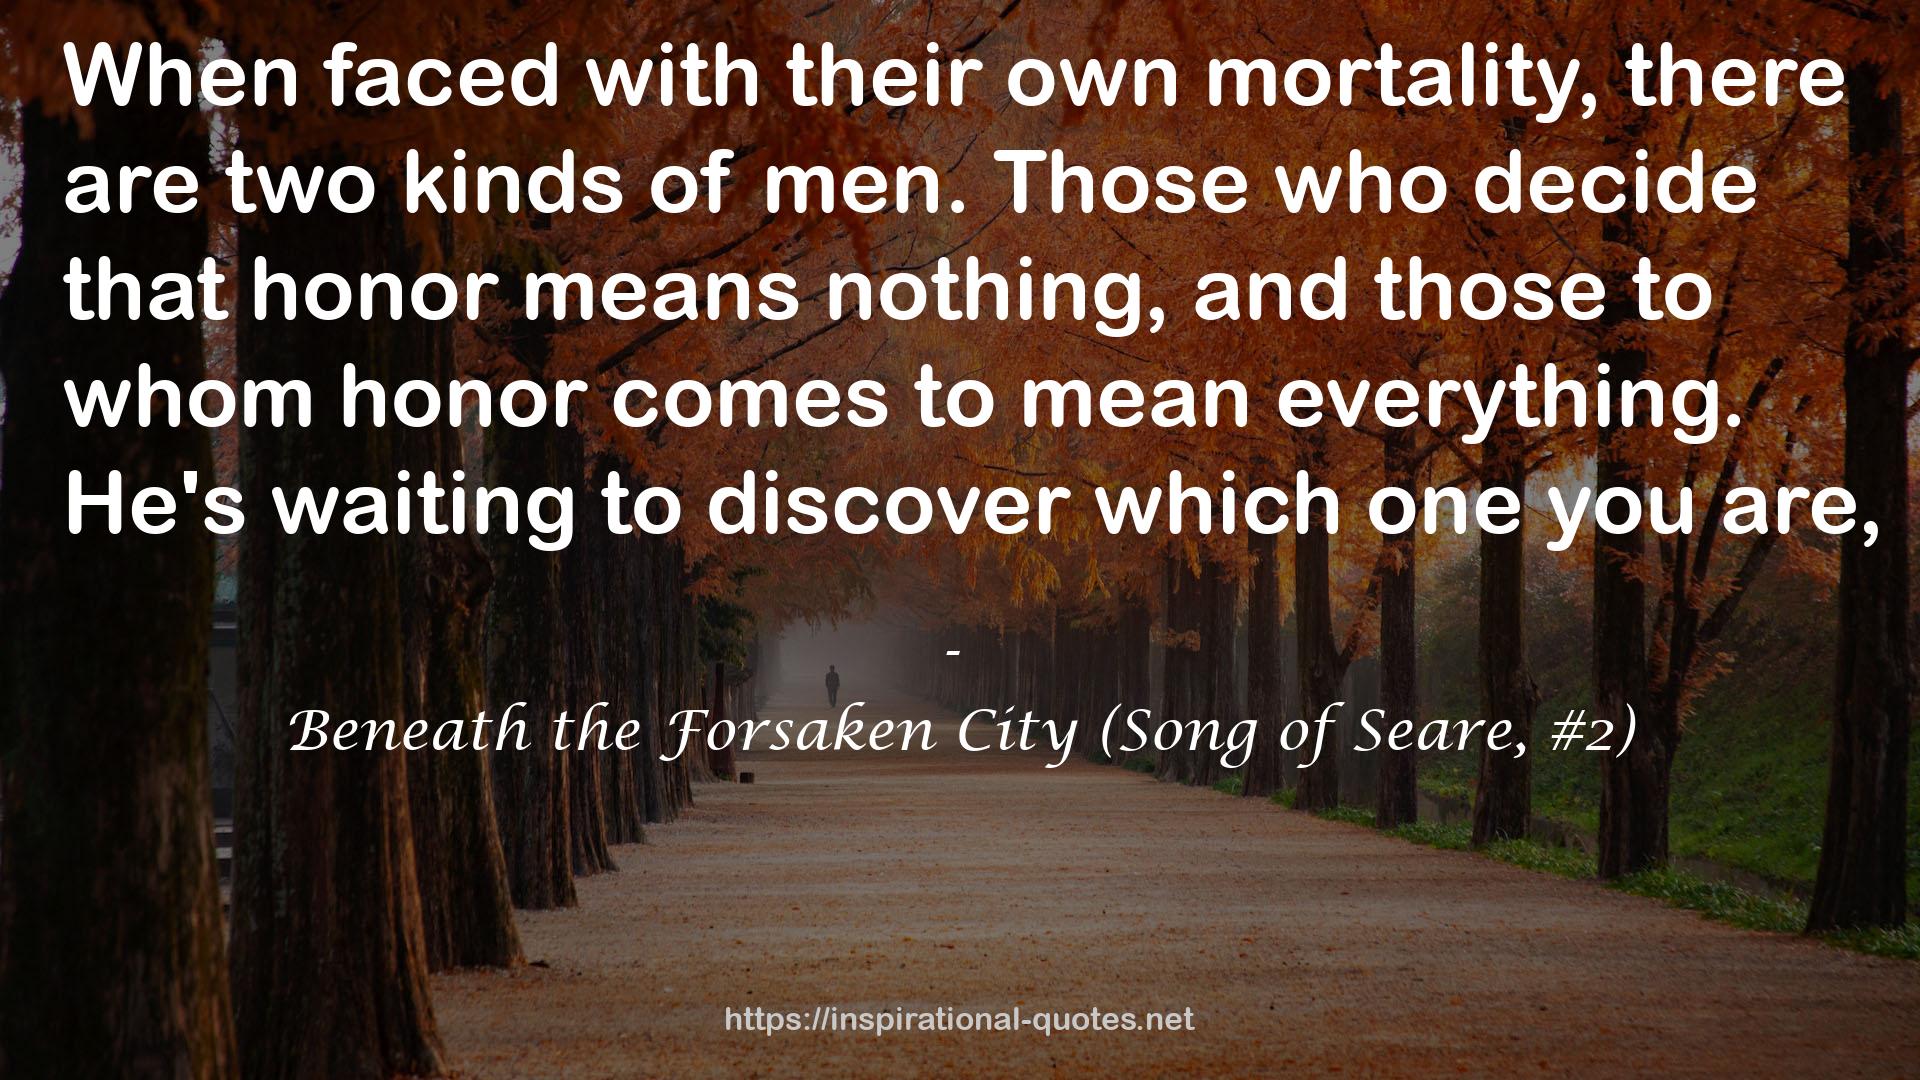 Beneath the Forsaken City (Song of Seare, #2) QUOTES